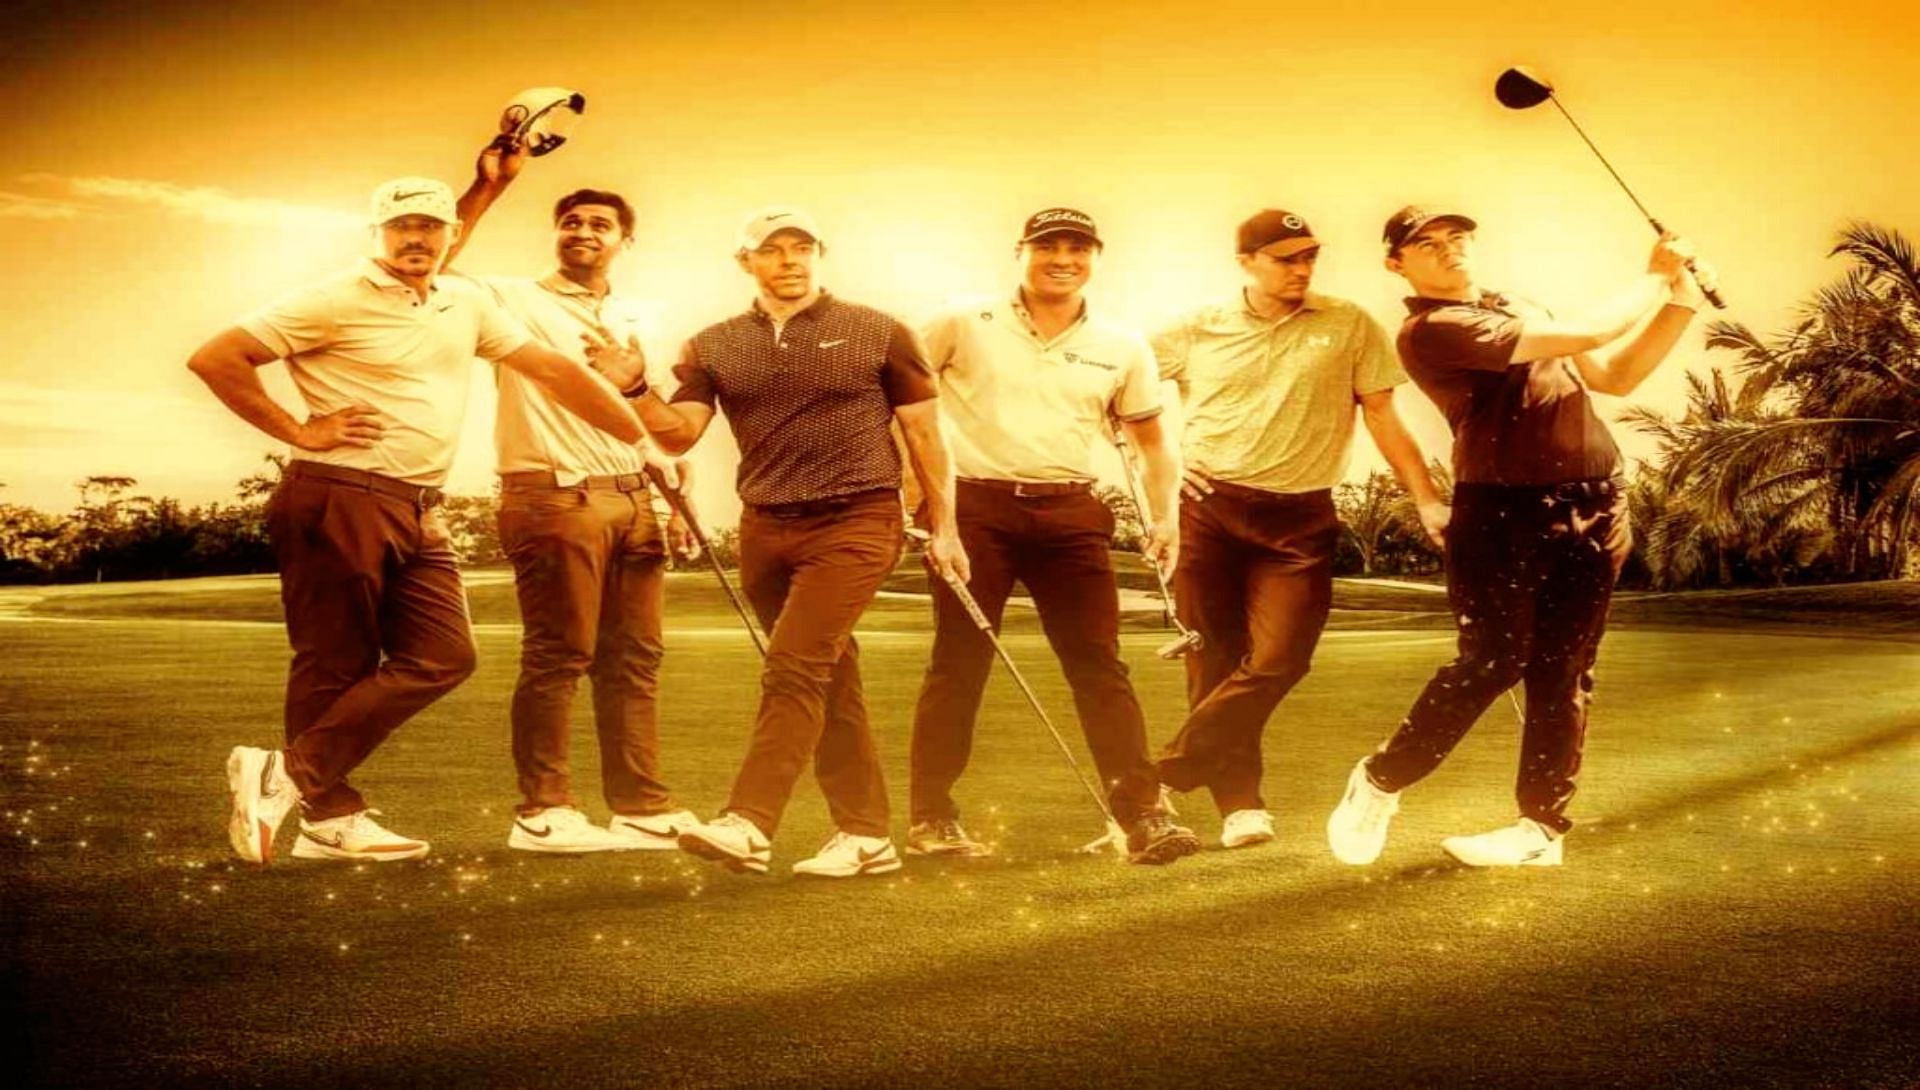 Part of the cast of &quot;Full Swing,&quot; which we could be watching in Netflix